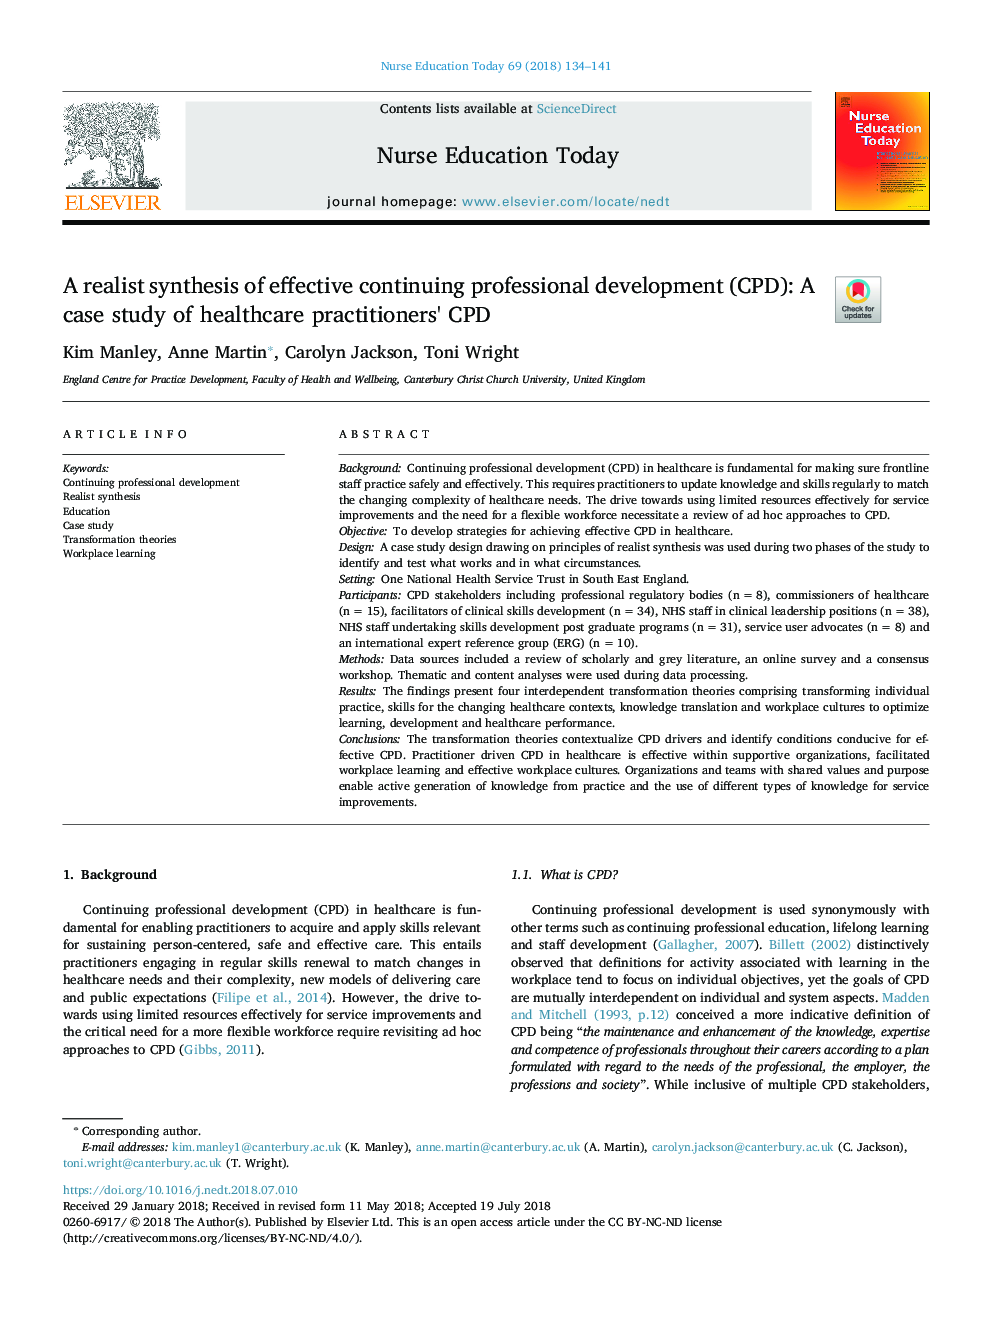 A realist synthesis of effective continuing professional development (CPD): A case study of healthcare practitioners' CPD